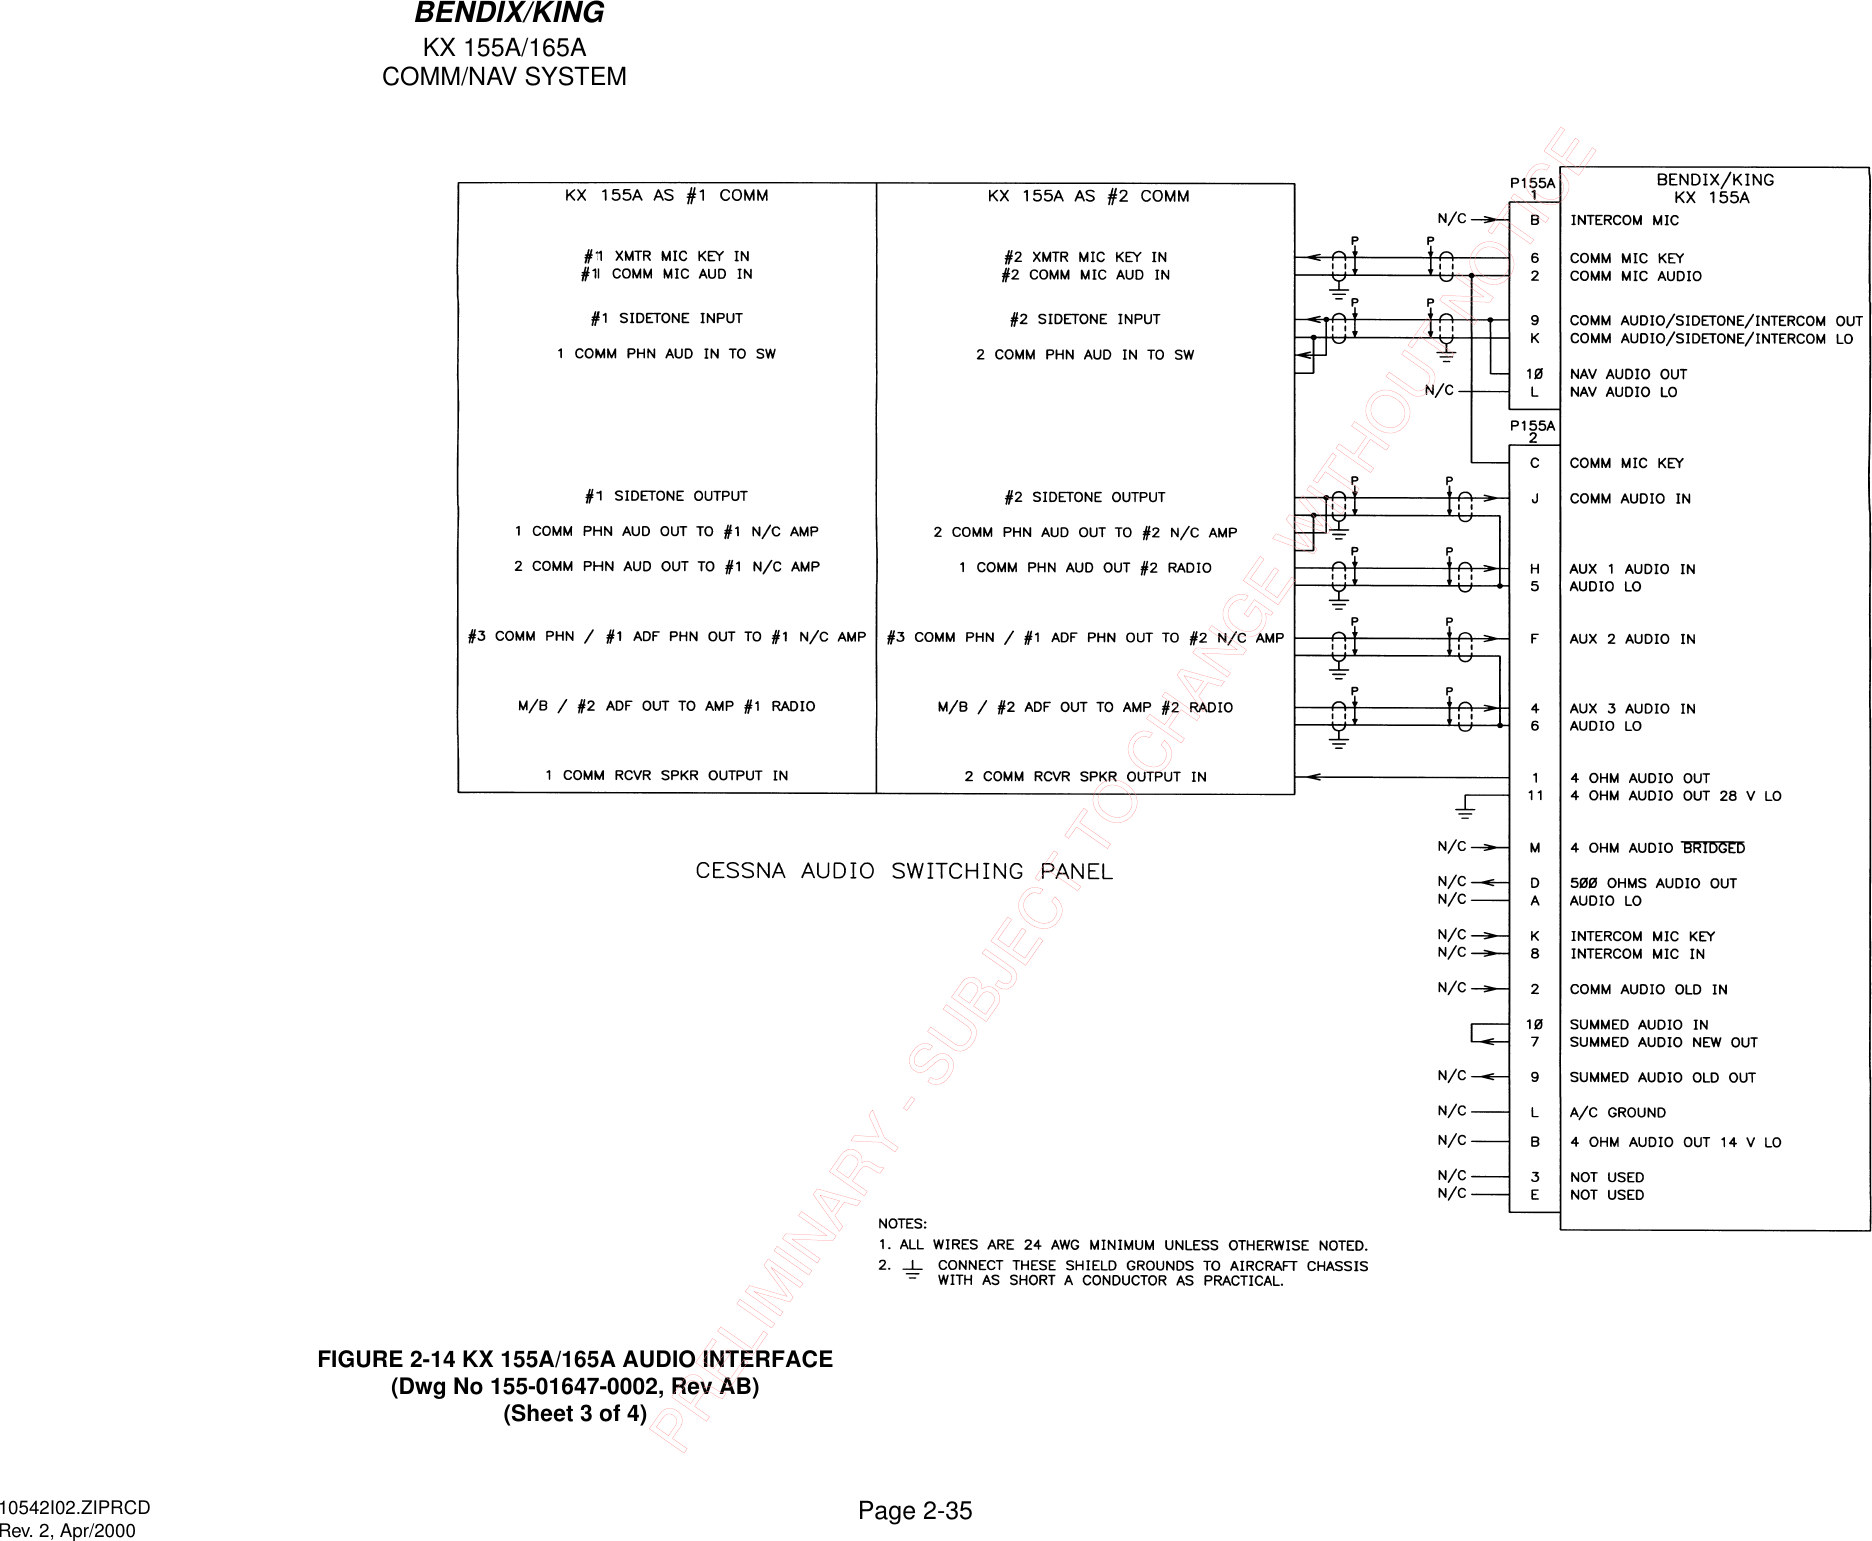 KX 155A/165ACOMM/NAV SYSTEMPage 2-35BENDIX/KING10542I02.ZIPRCDRev. 2, Apr/2000FIGURE 2-14 KX 155A/165A AUDIO INTERFACE(Dwg No 155-01647-0002, Rev AB)(Sheet 3 of 4)PRELIMINARY - SUBJECT TO CHANGE WITHOUT NOTICE